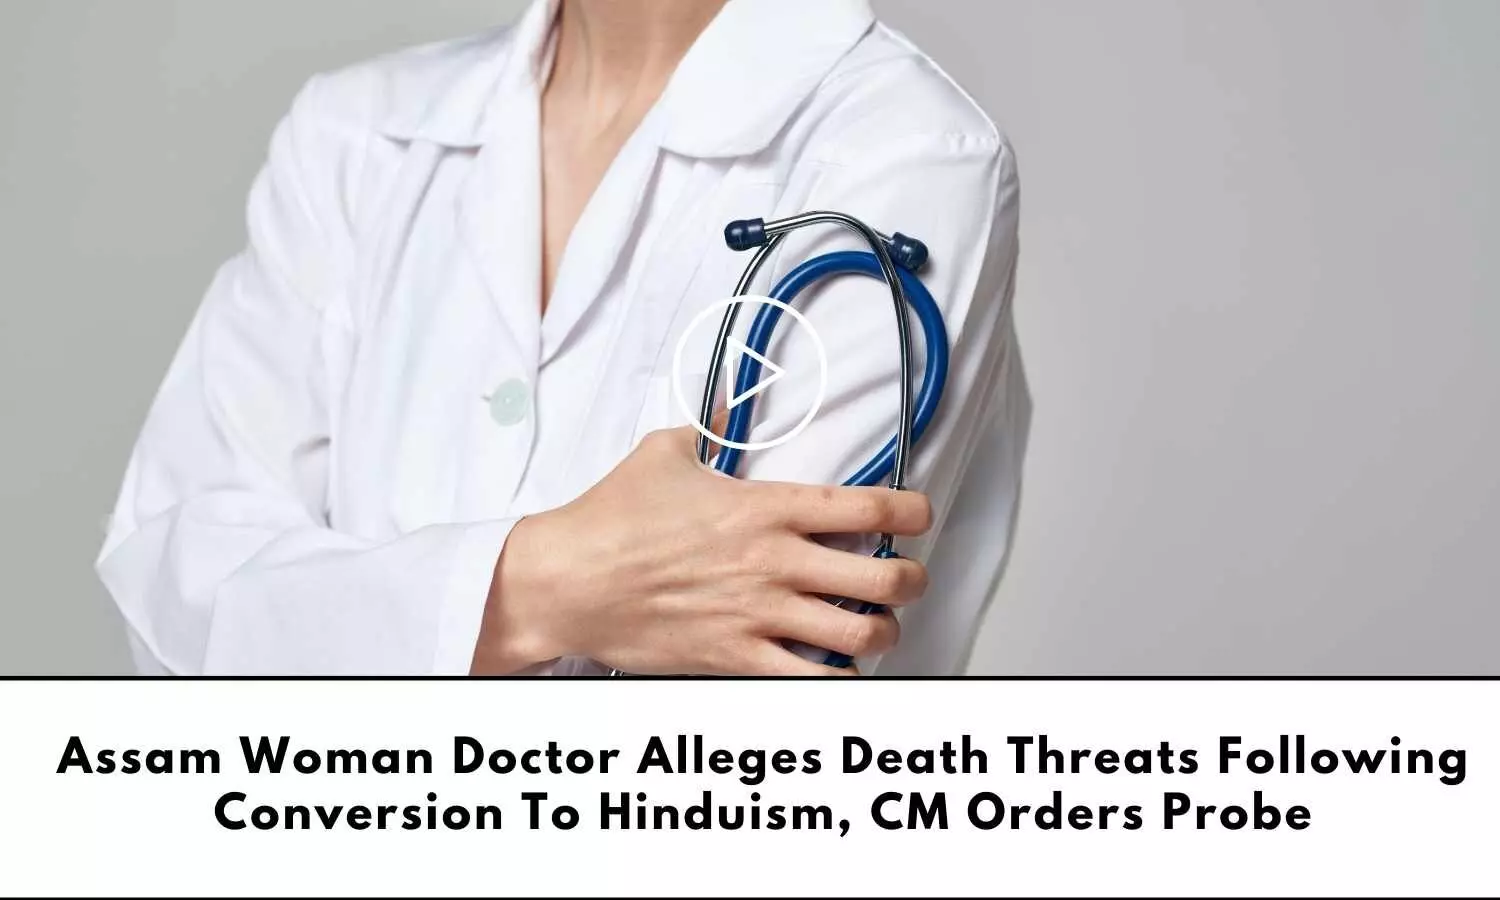 Doctor alleges death threats following conversion to hinduism